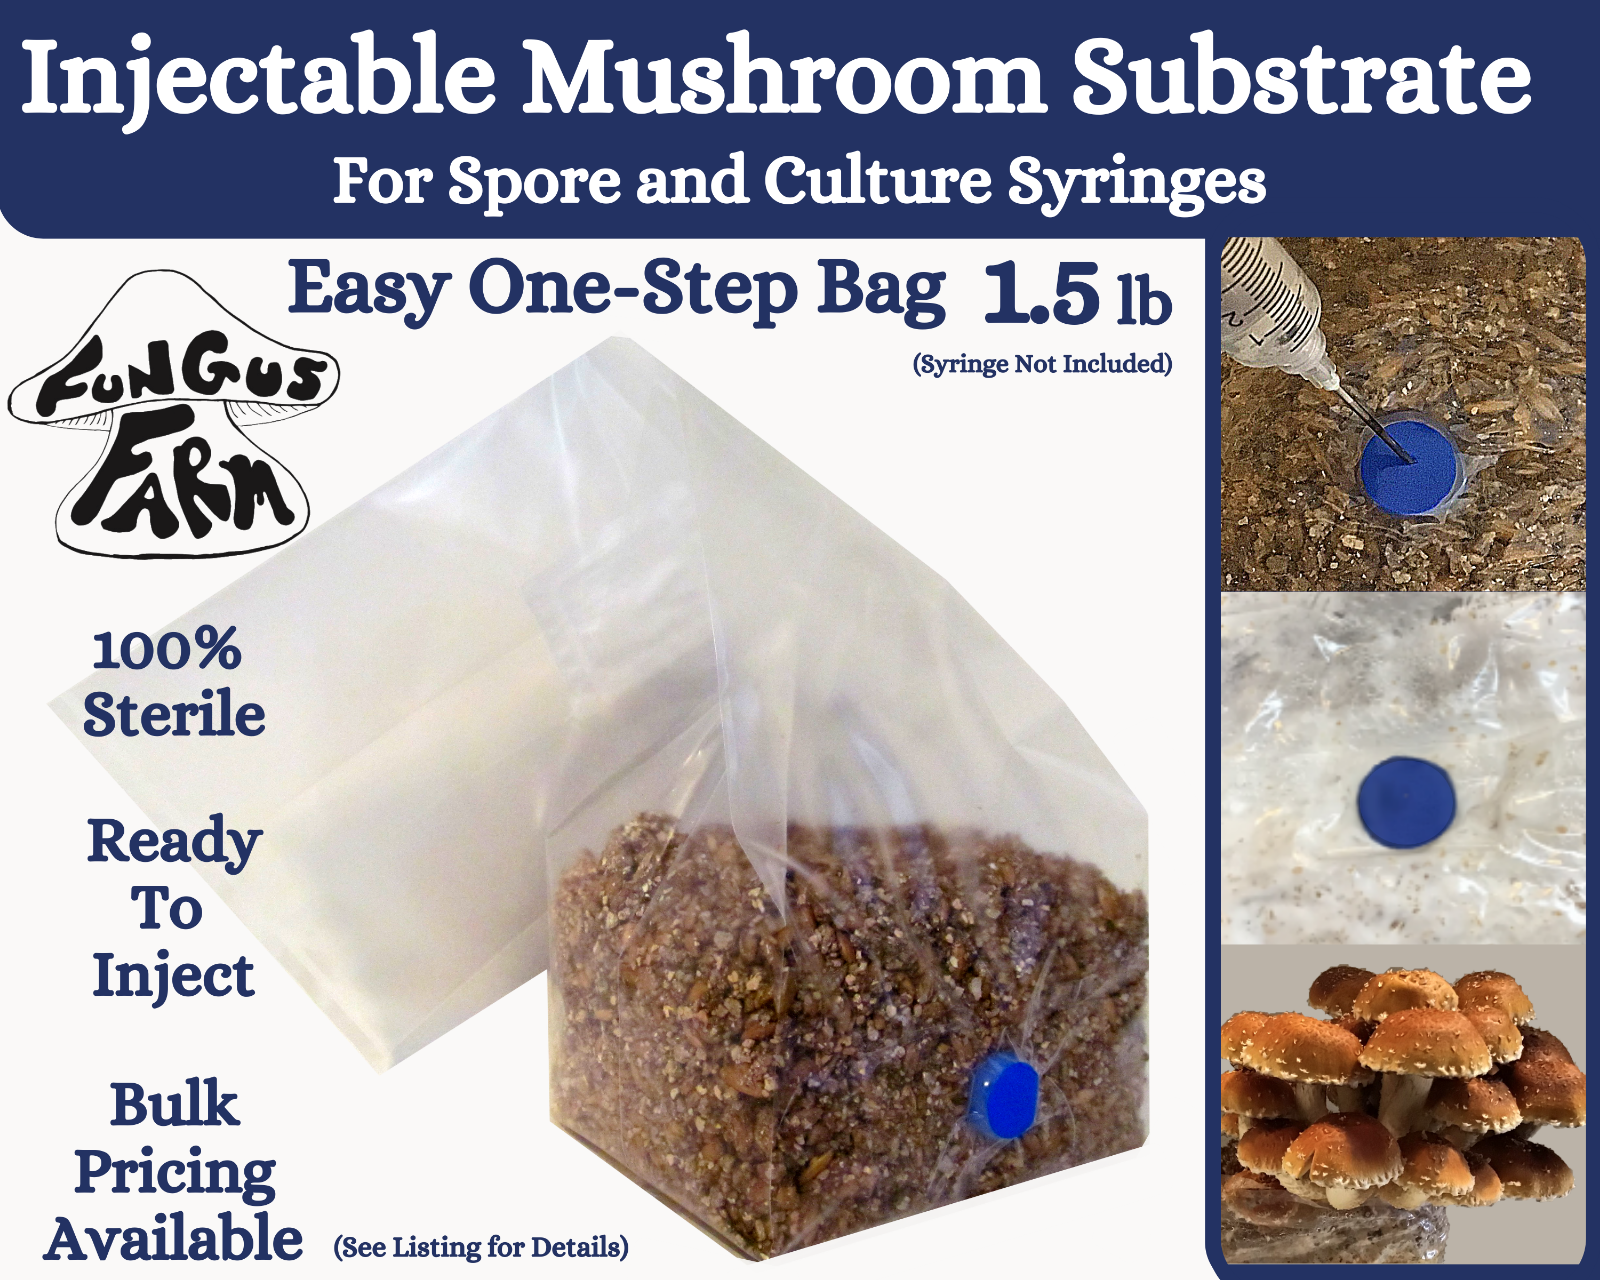 One-Step Mushroom Grow Bag Direct From Injection Substrate 1.5 lb